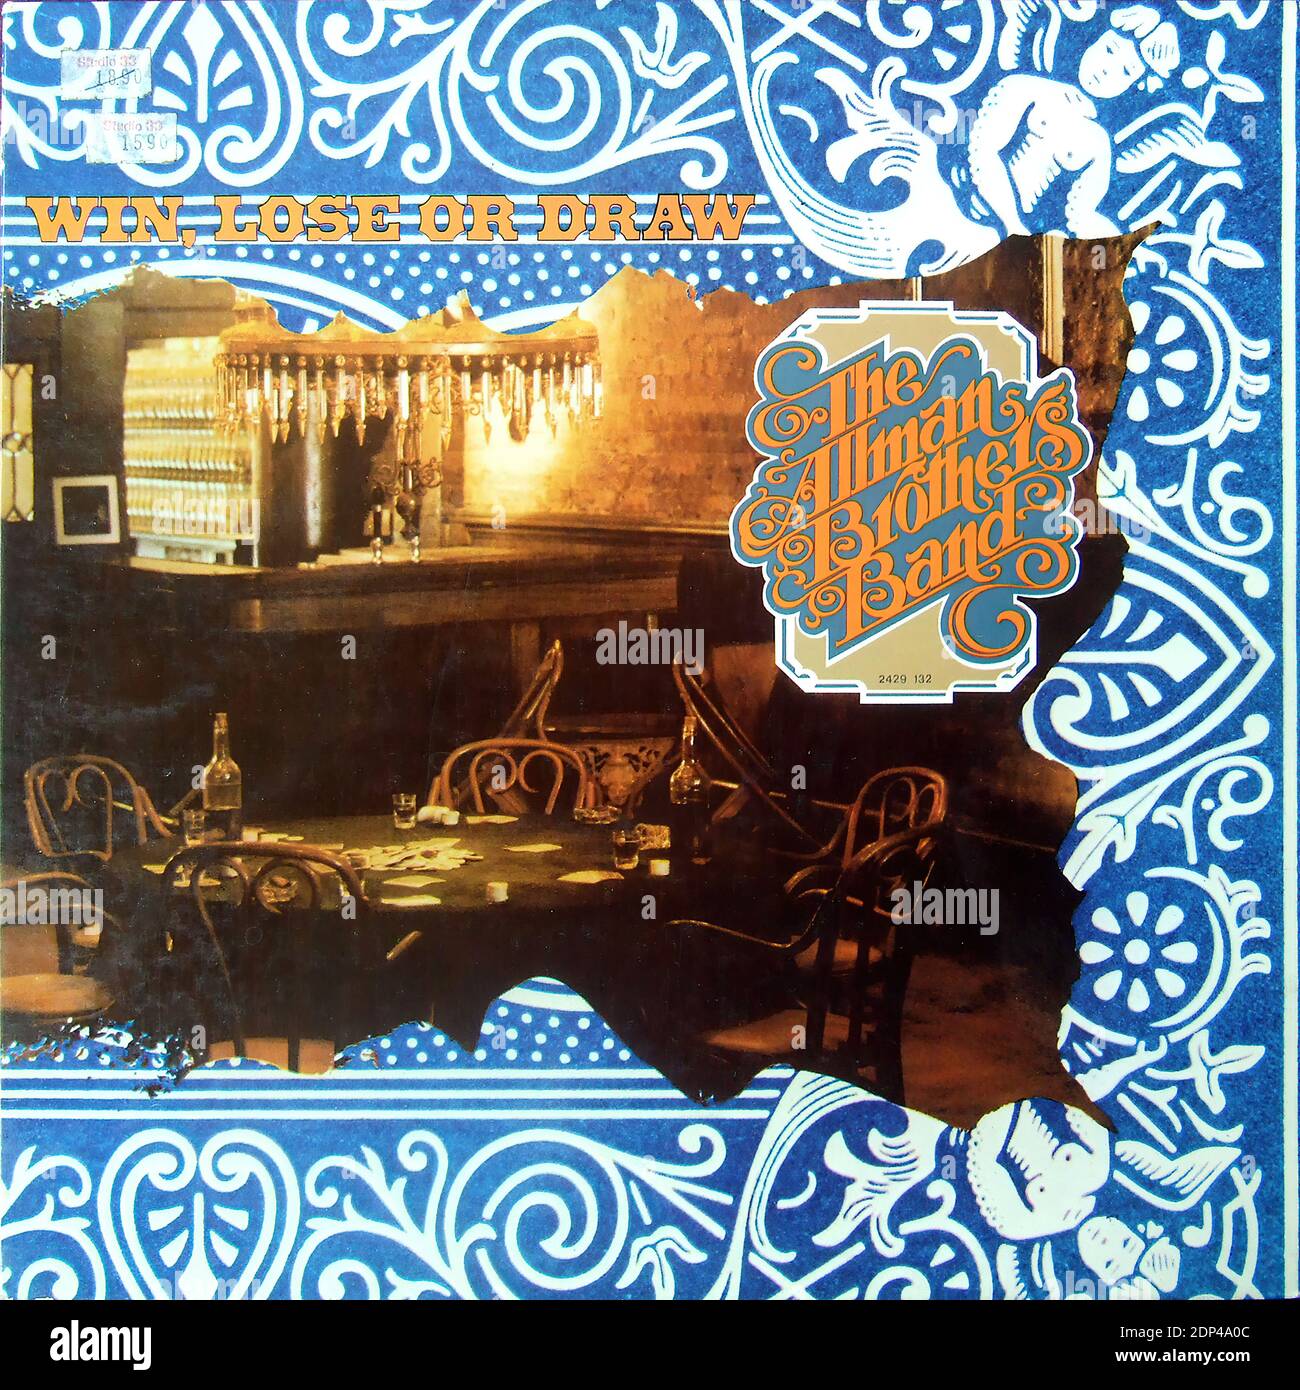 The Allman Brothers Band Win, Lose Or Draw Vintage vinyl album